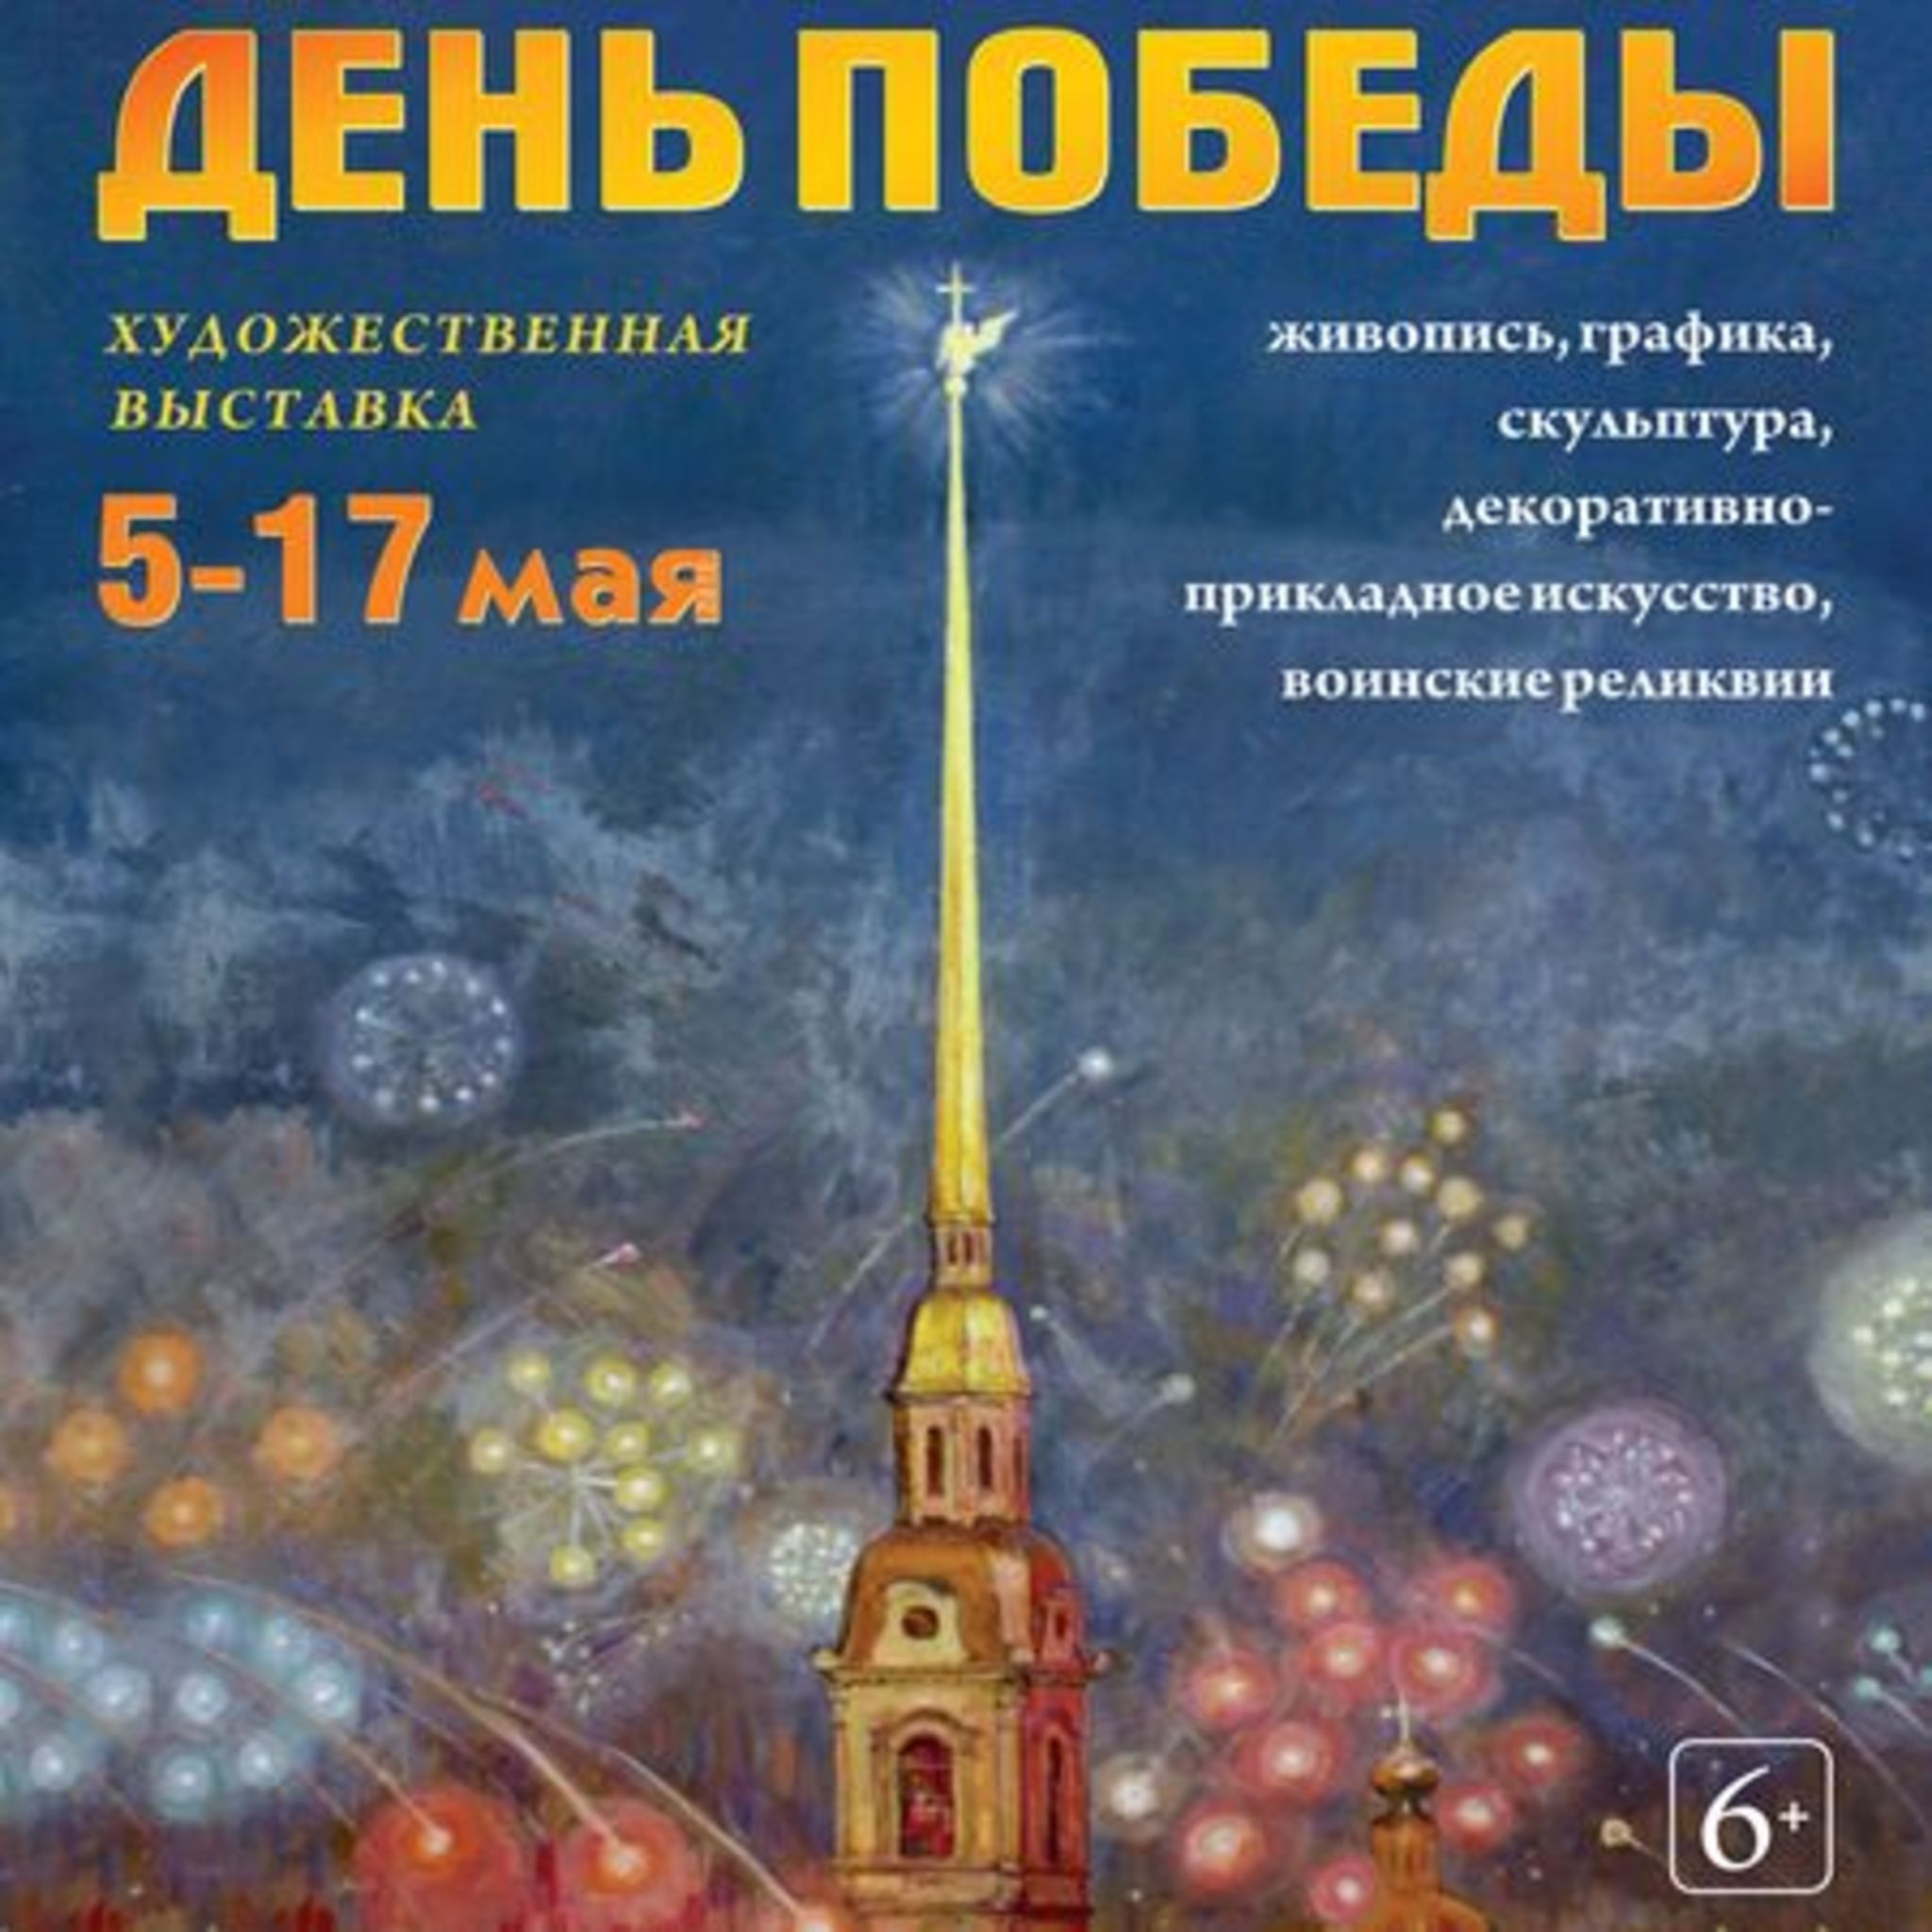 Art Exhibition of the Victory Day